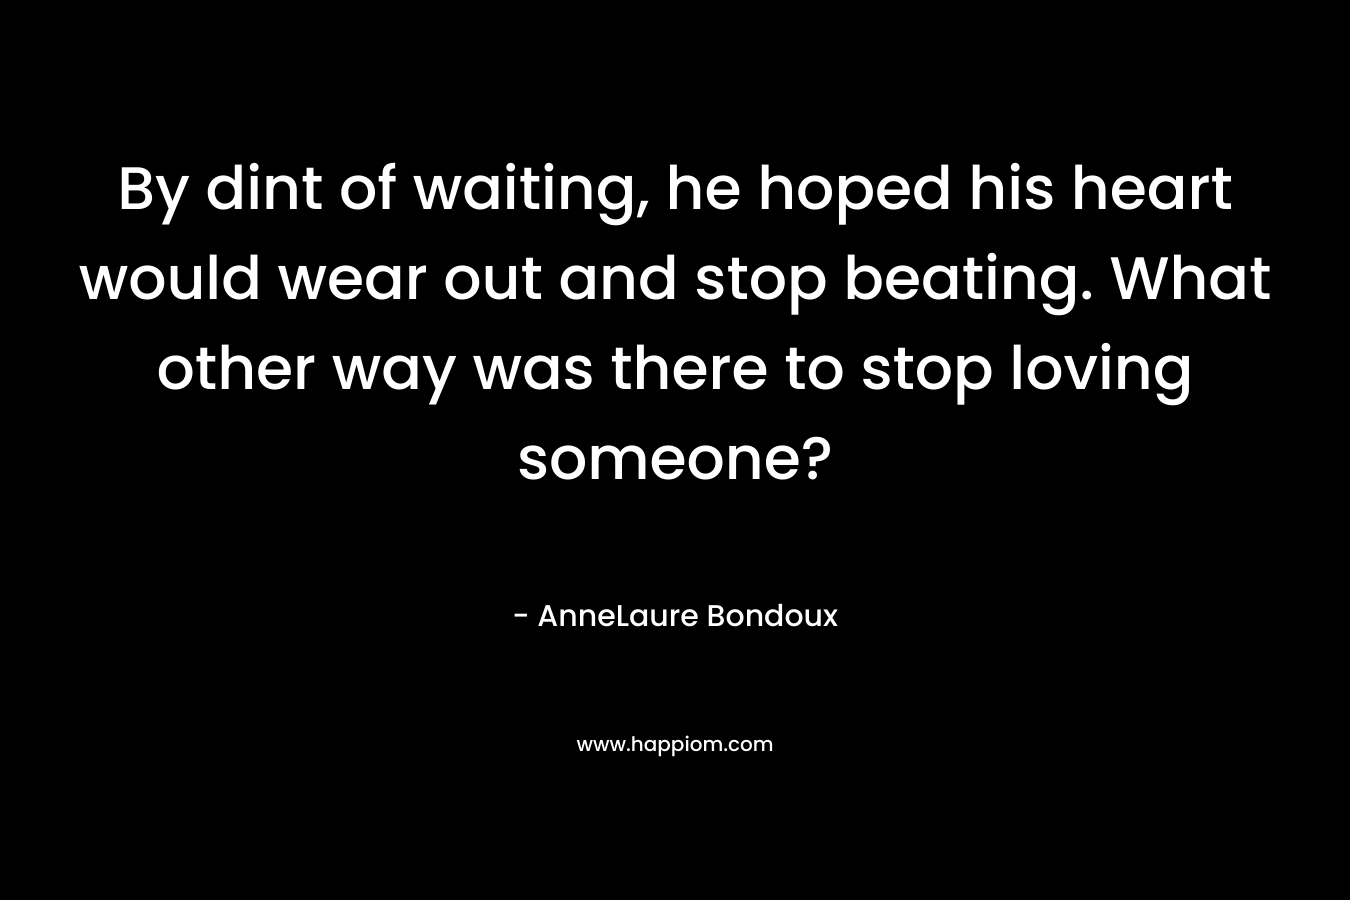 By dint of waiting, he hoped his heart would wear out and stop beating. What other way was there to stop loving someone? – AnneLaure Bondoux